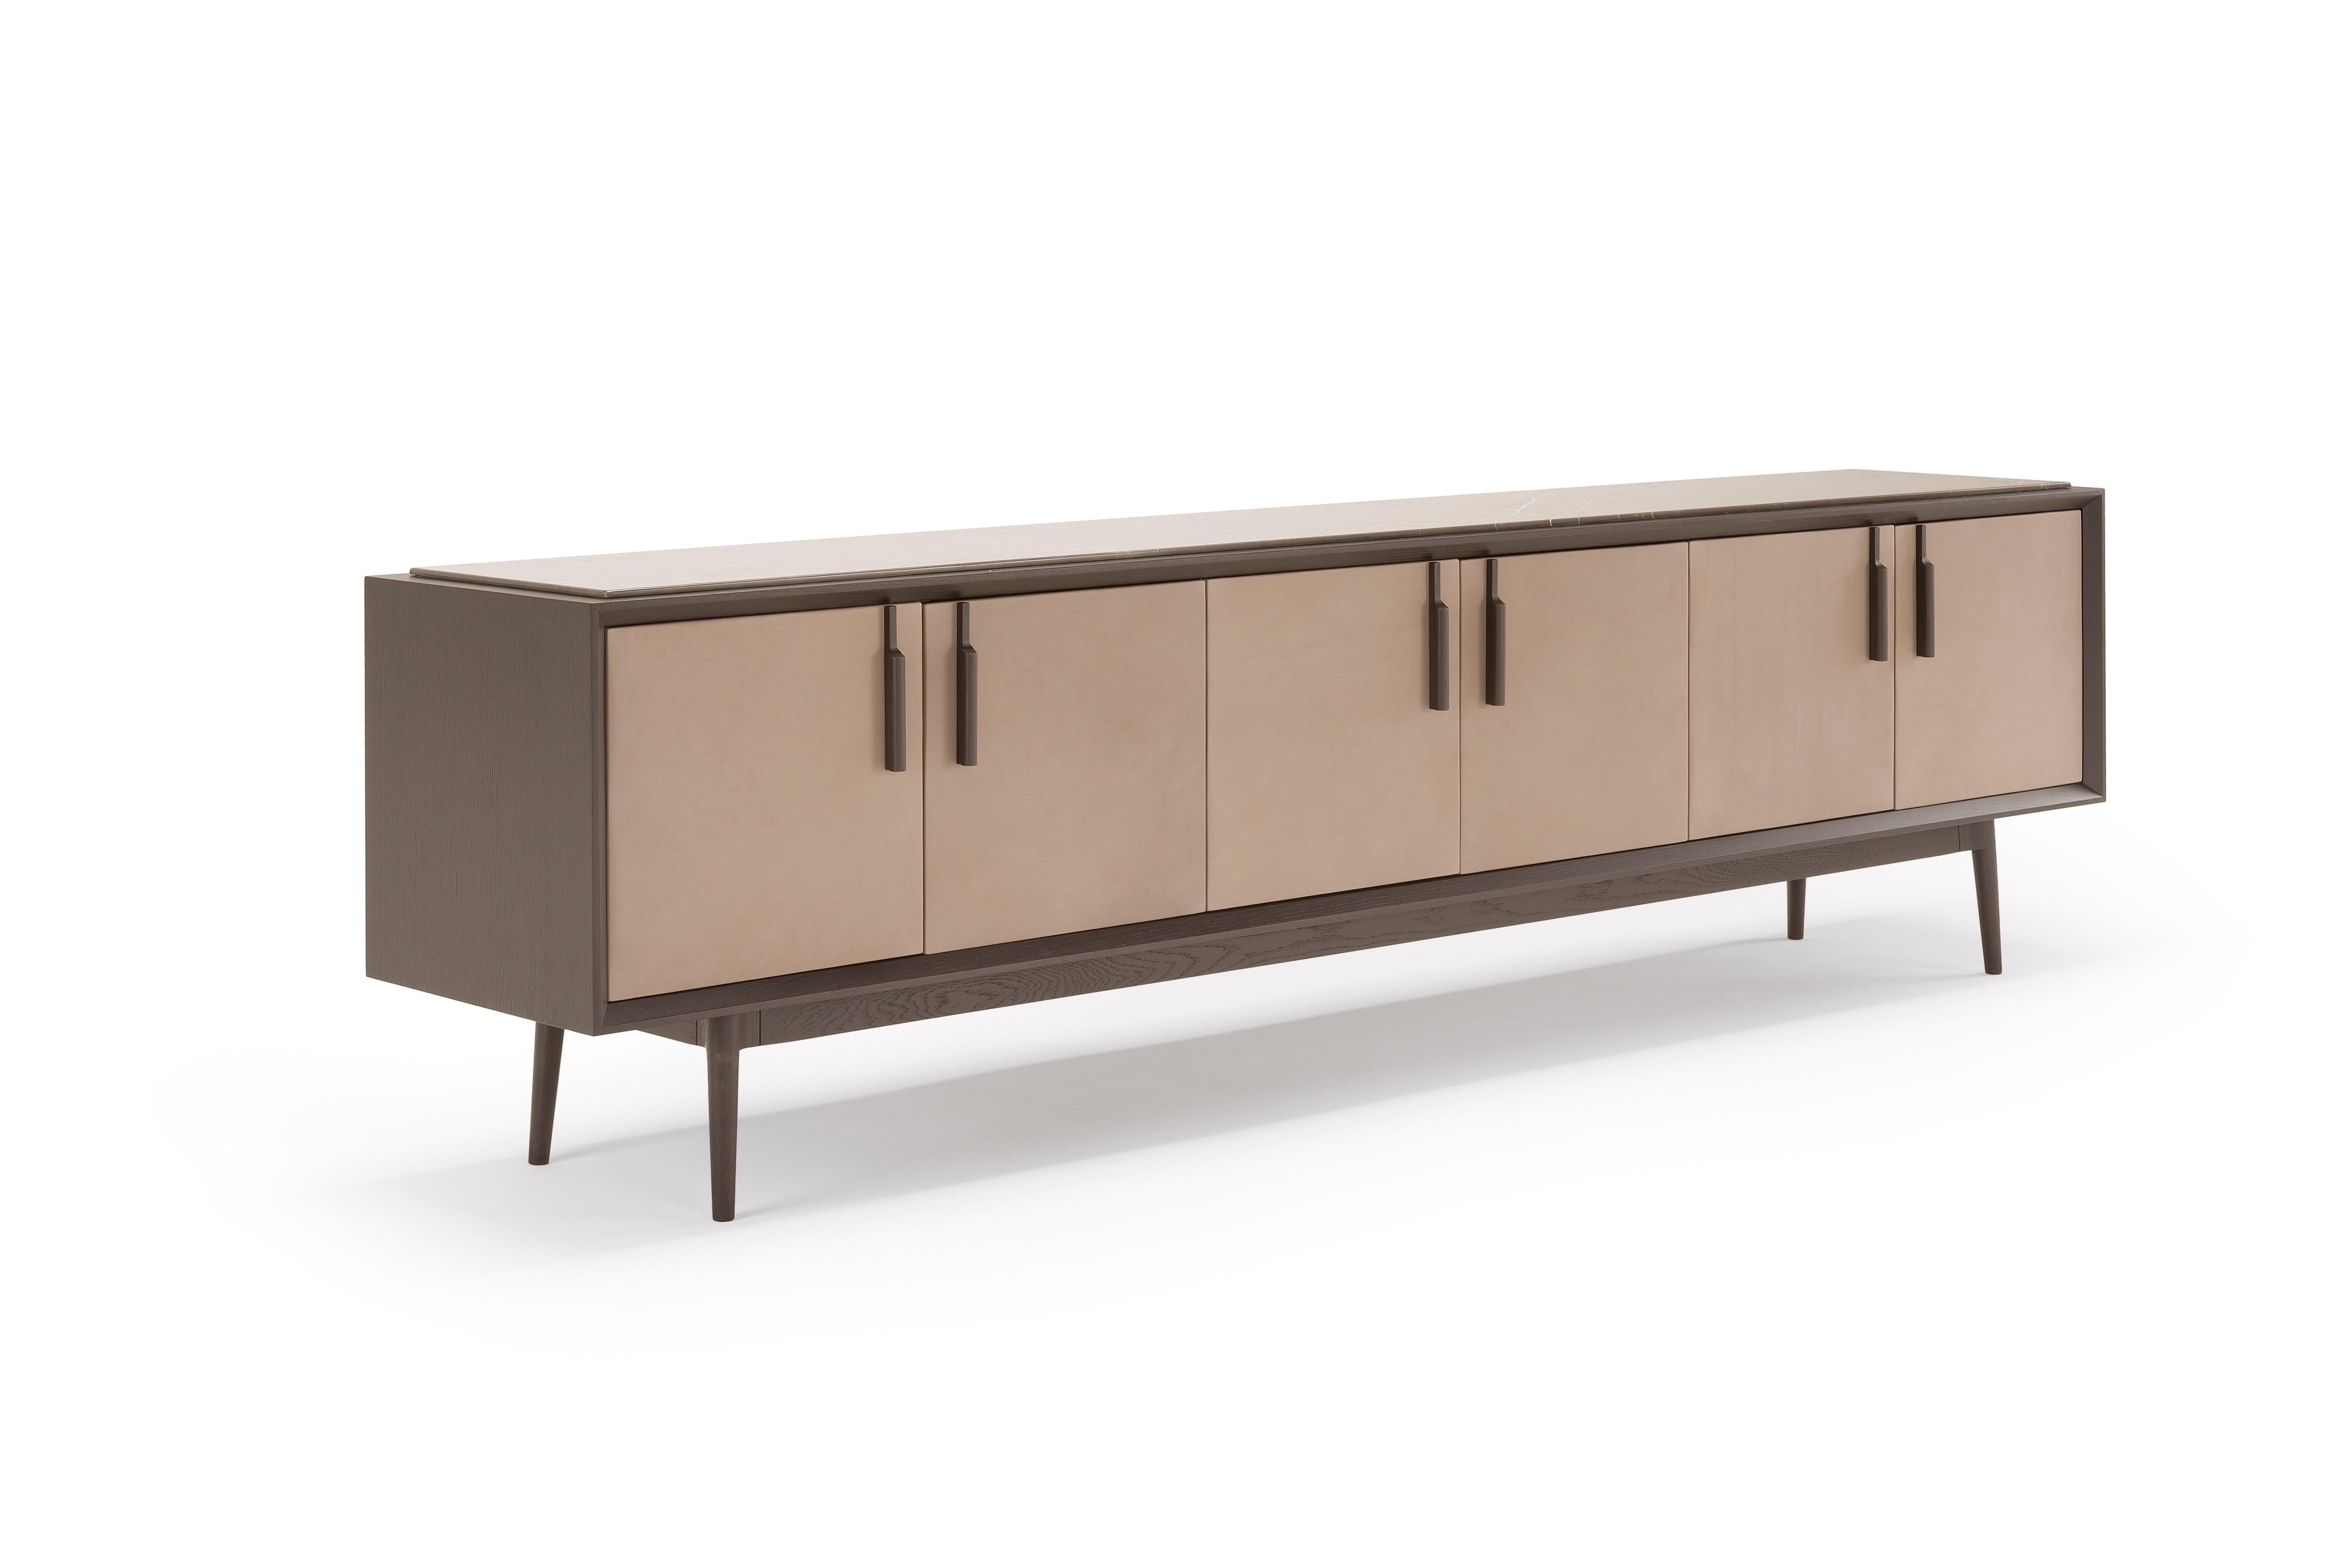 Theo is a modern take on a traditional furniture piece: the sideboard. The elegant wood container in dark oak is enriched by a refined detail: the leather upholstery of the doors, themselves enhanced by the slender oak handles. The base itself,